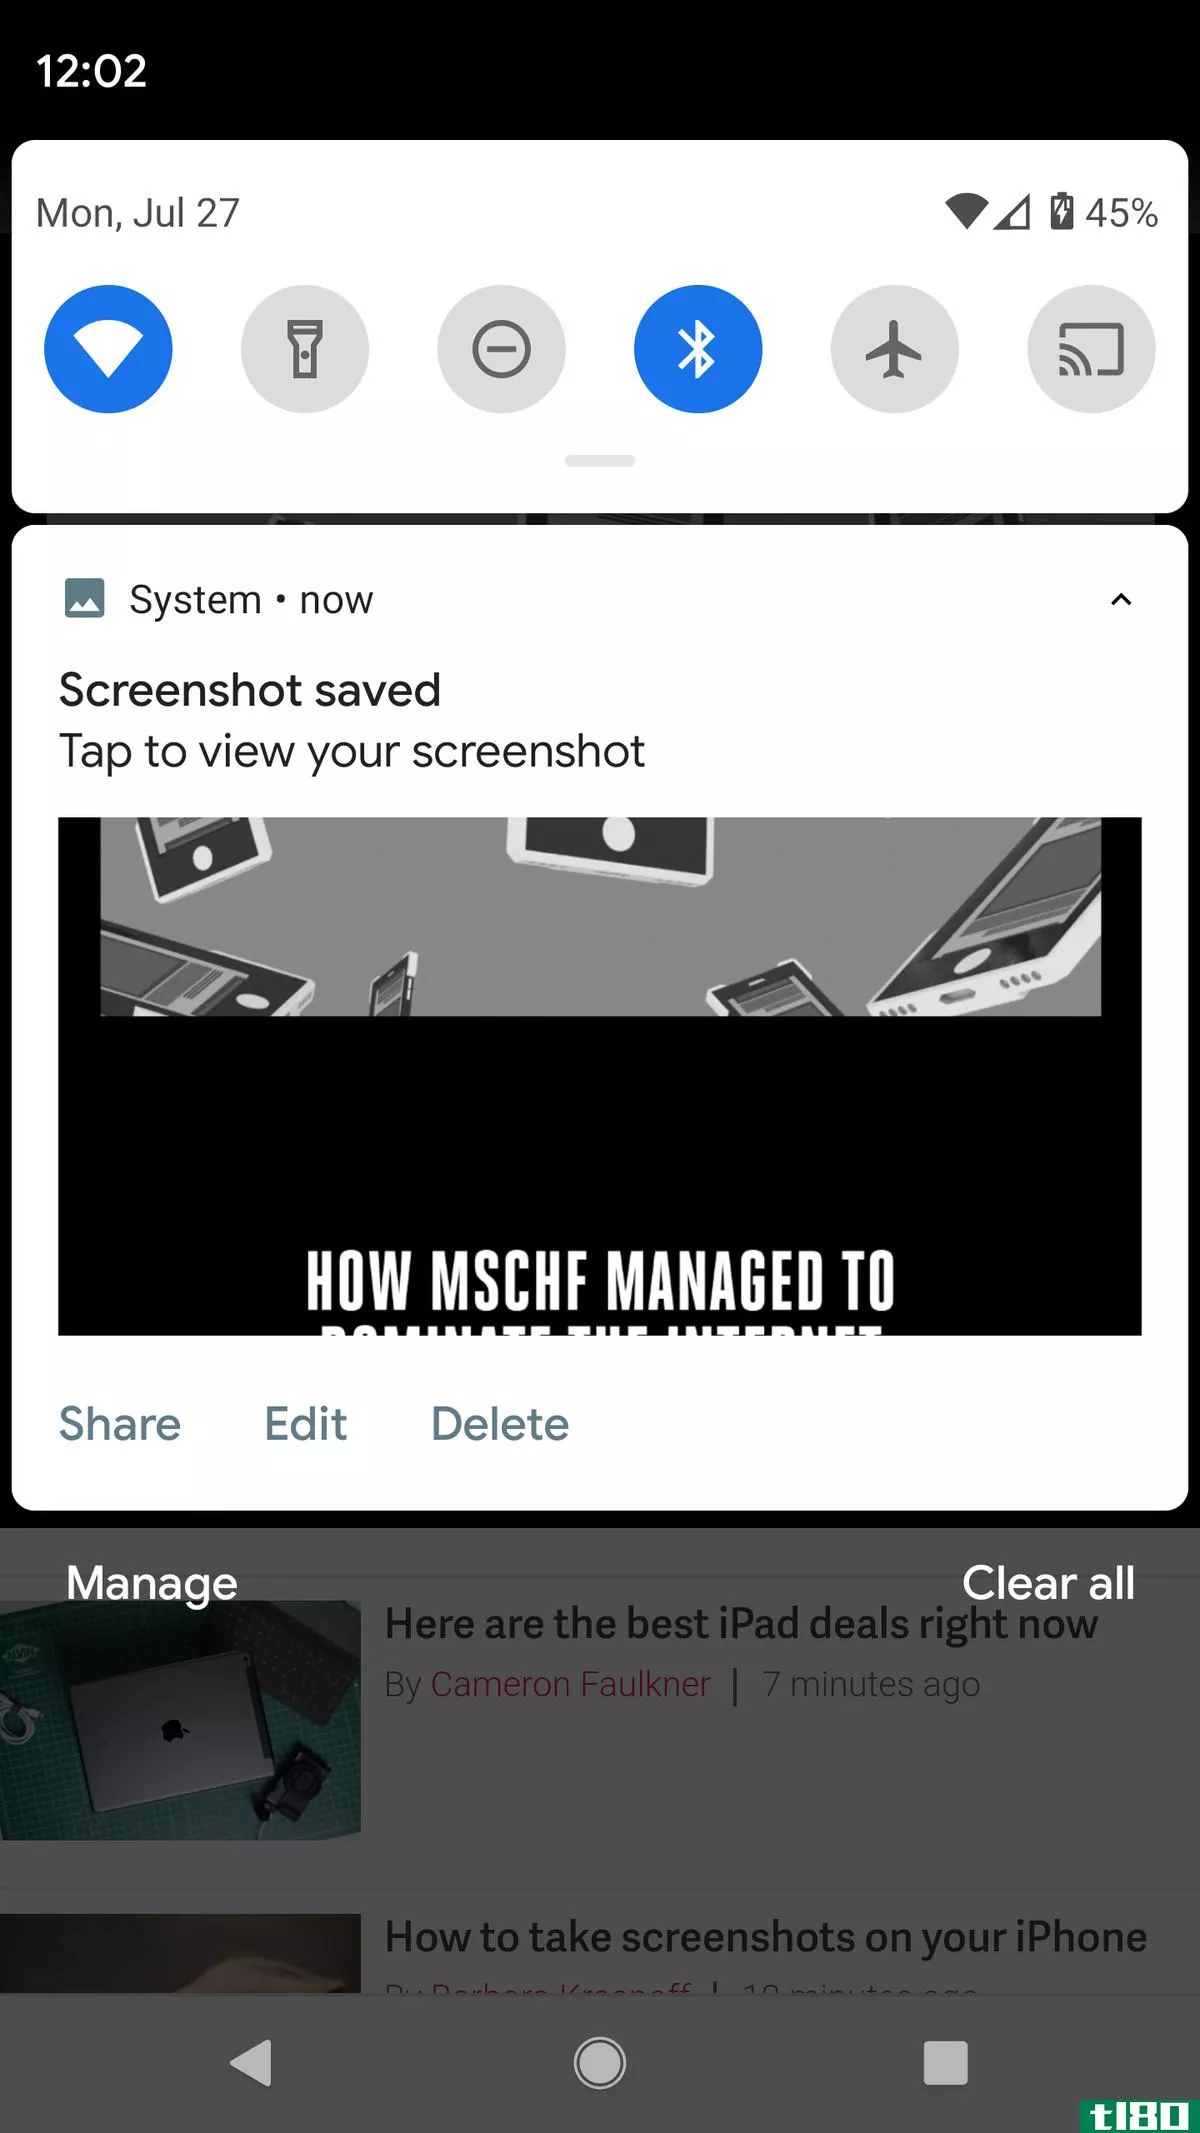 If you miss the share / edit / delete drop-down, you can find the new screenshot in your notificati***.